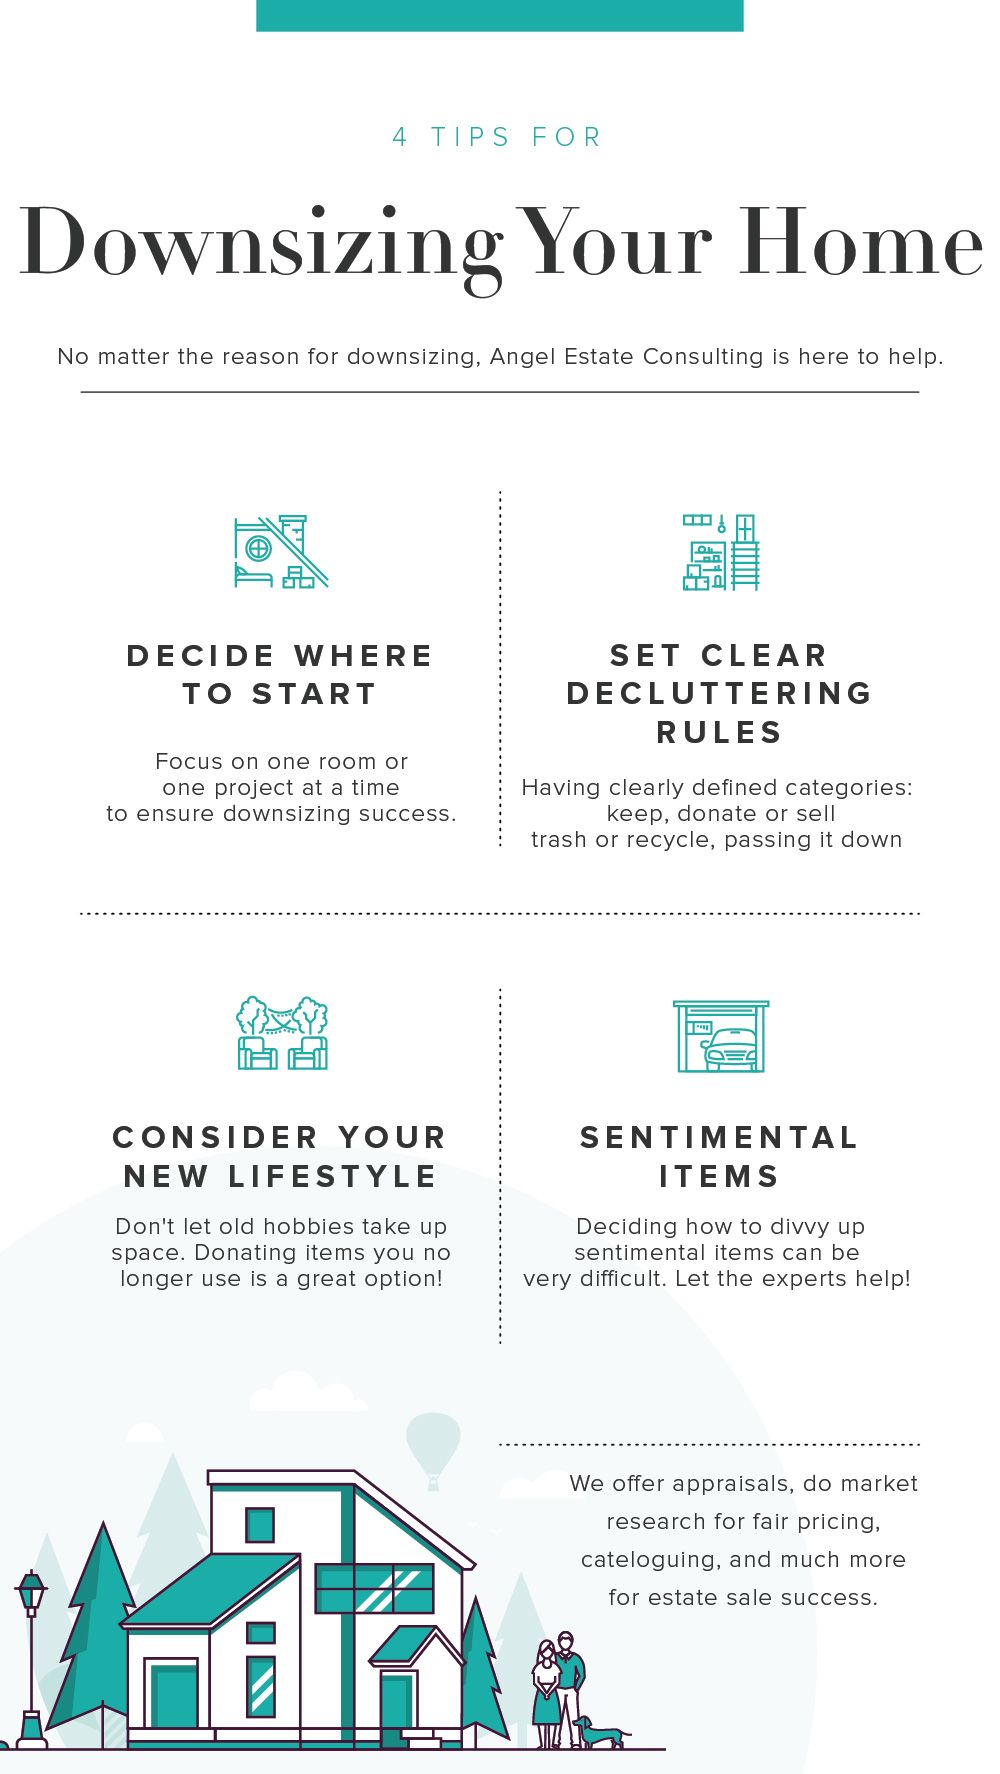 4 Tips For Downsizing Your Home_infographic-01.jpg